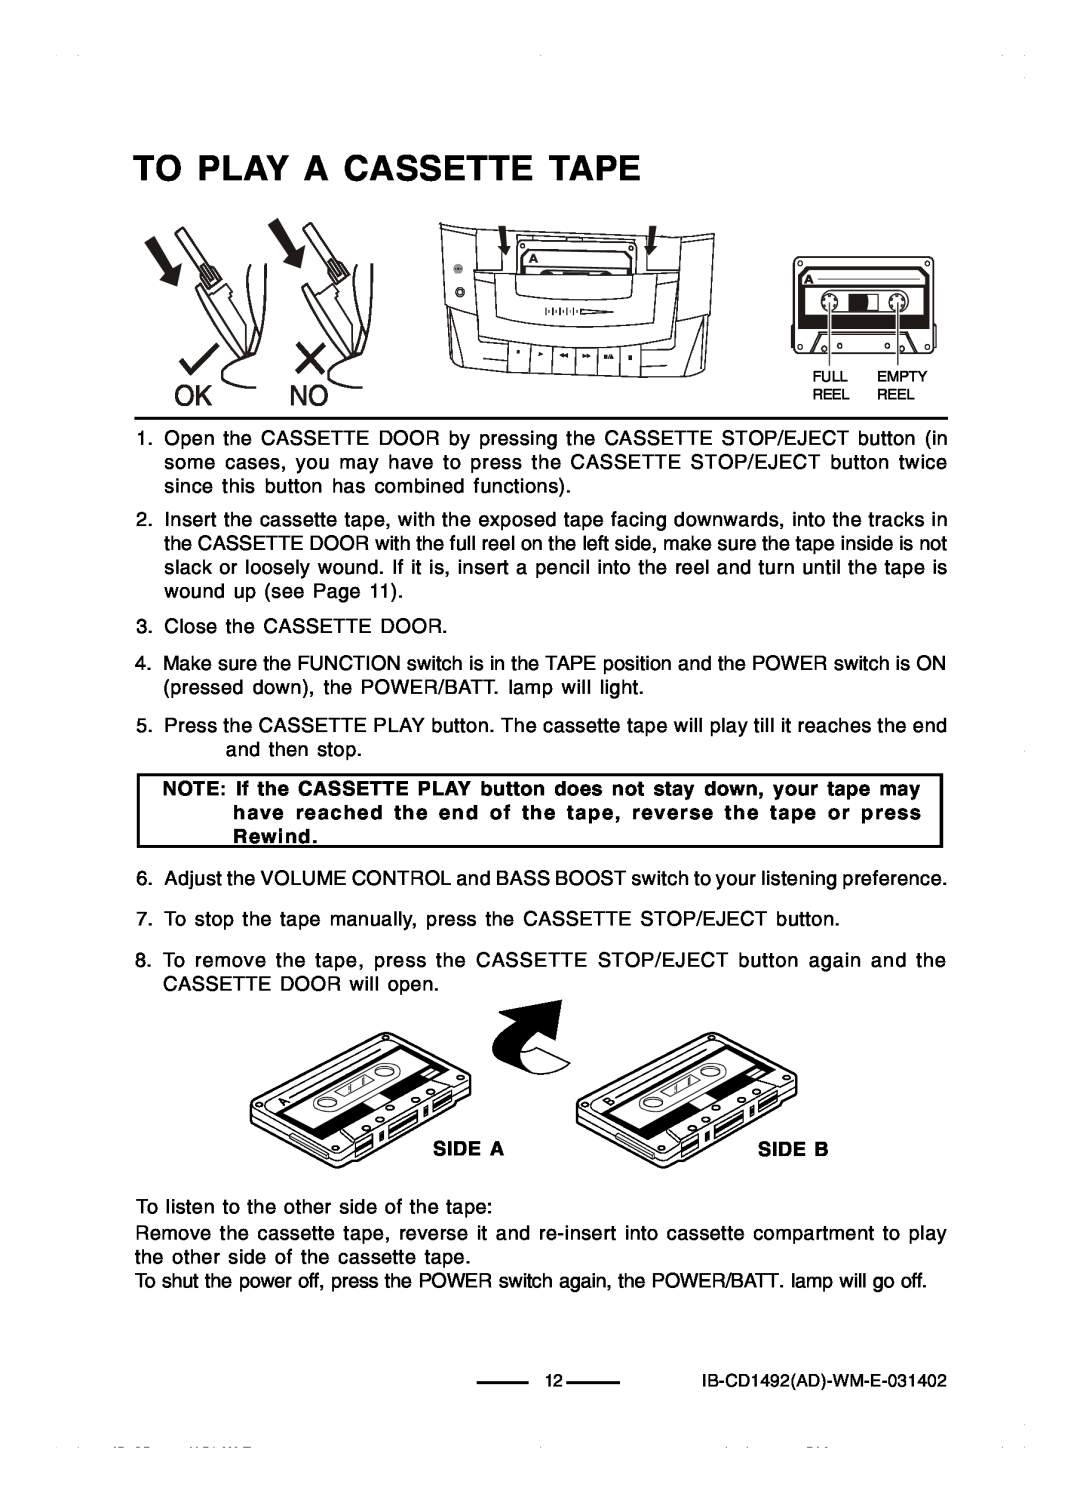 Lenoxx Electronics CD-1492 operating instructions To Play A Cassette Tape 